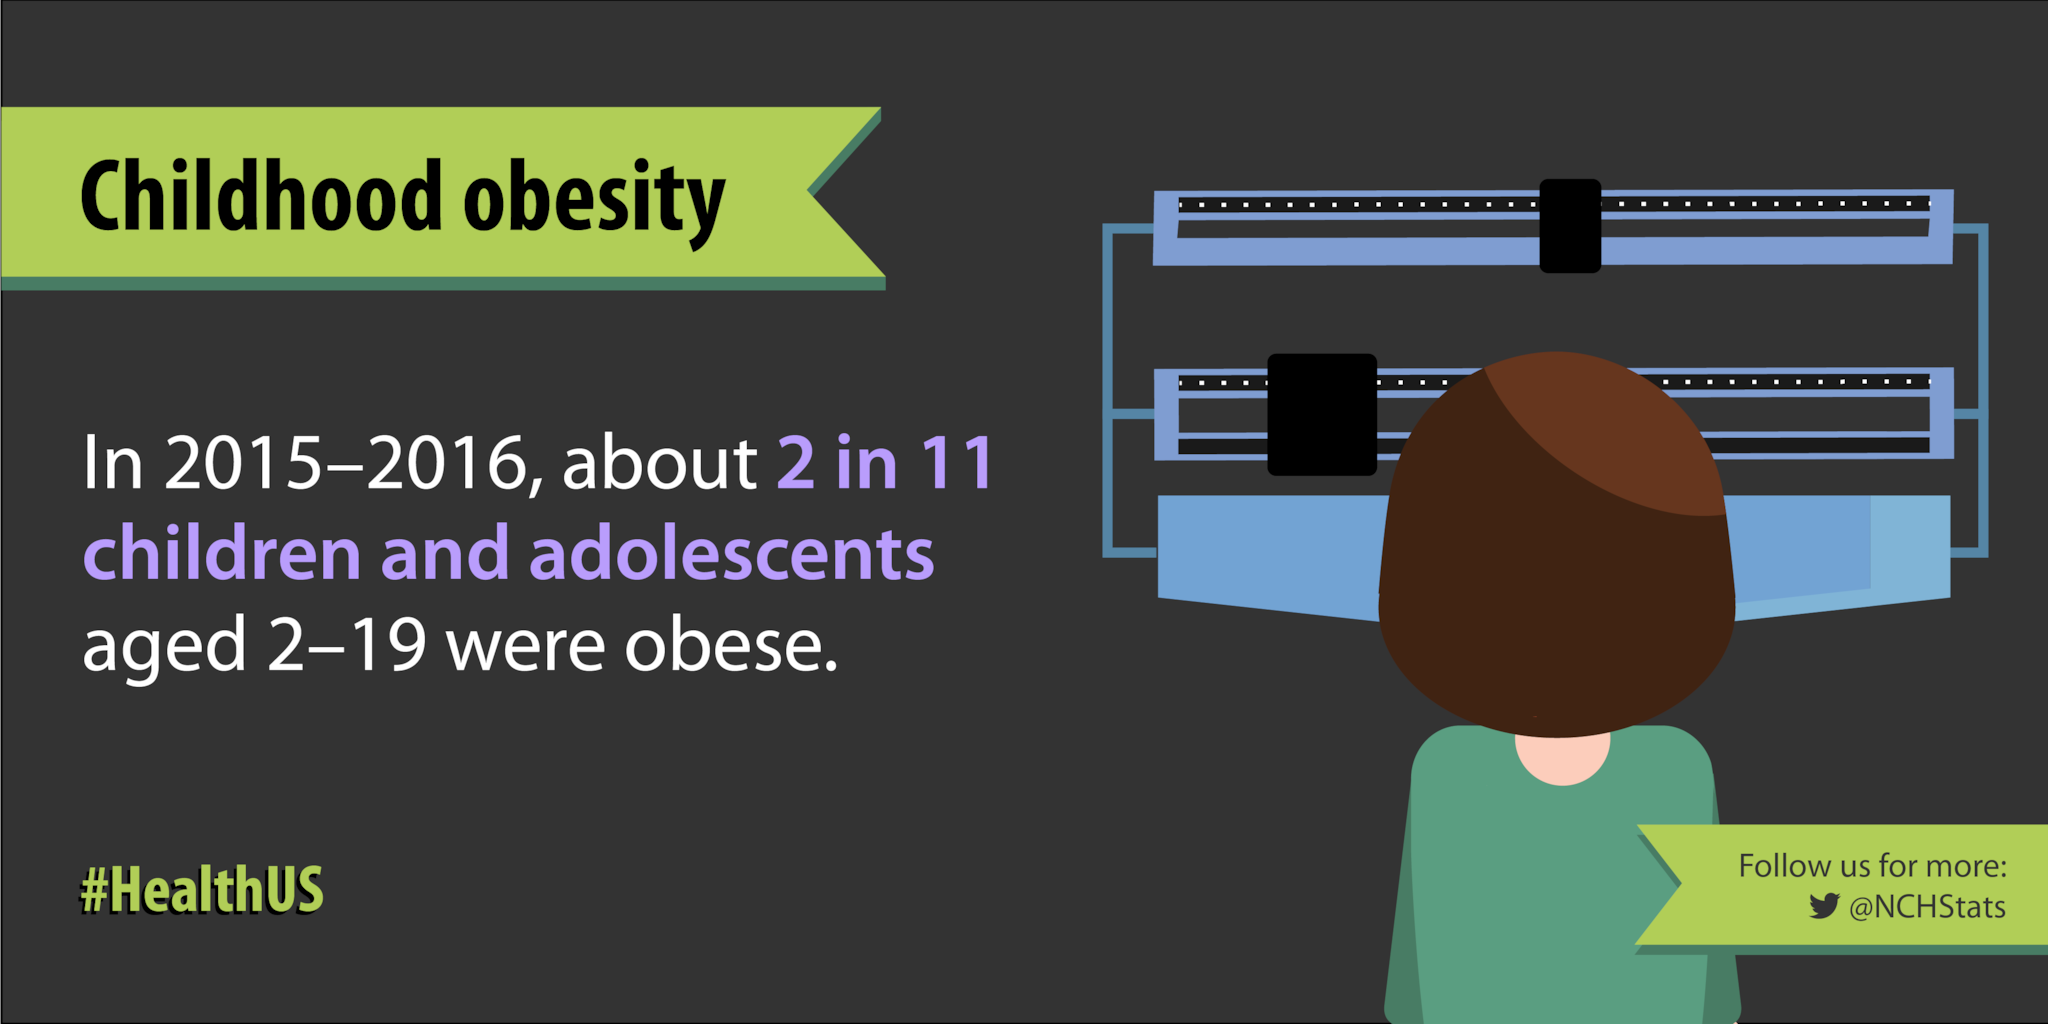 In 2015-2016, about 2 in 11 children and adolescents aged 2-19 were obese.